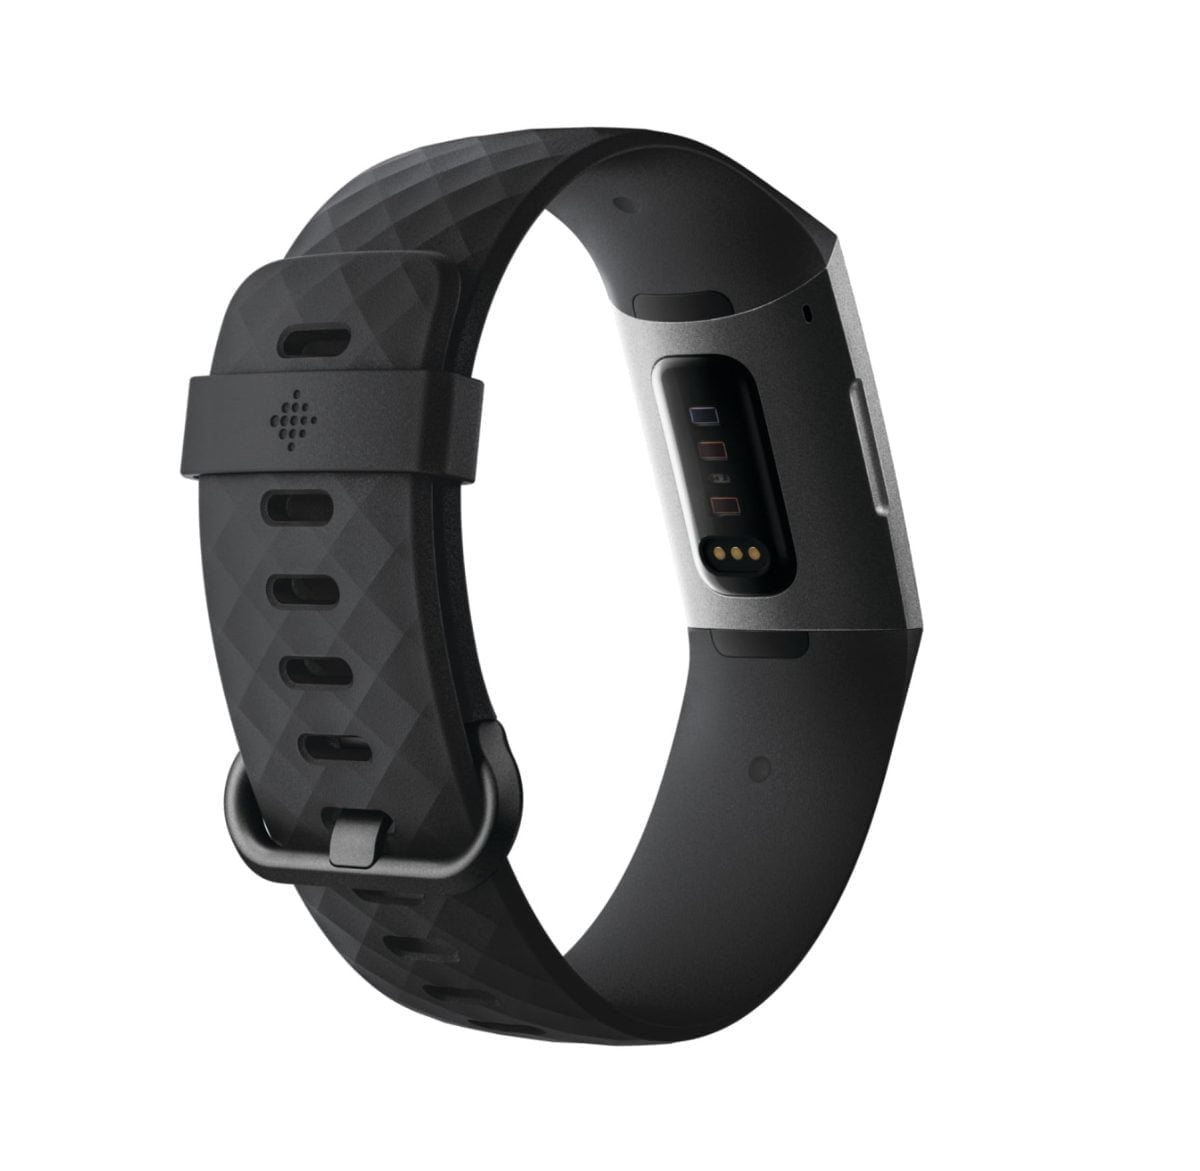 6288056 Bd Fitbit &Lt;H1&Gt;Fitbit - Charge 3 Activity Tracker - Black/Graphite&Lt;/H1&Gt; Https://Www.youtube.com/Watch?V=Omjhc4Iv4Z4 &Nbsp; Accessories Included: Small &Amp; Large Bands, Charge Cable Fitbit Charge 3 Fitbit Charge 3 Activity Tracker - Black/Graphite